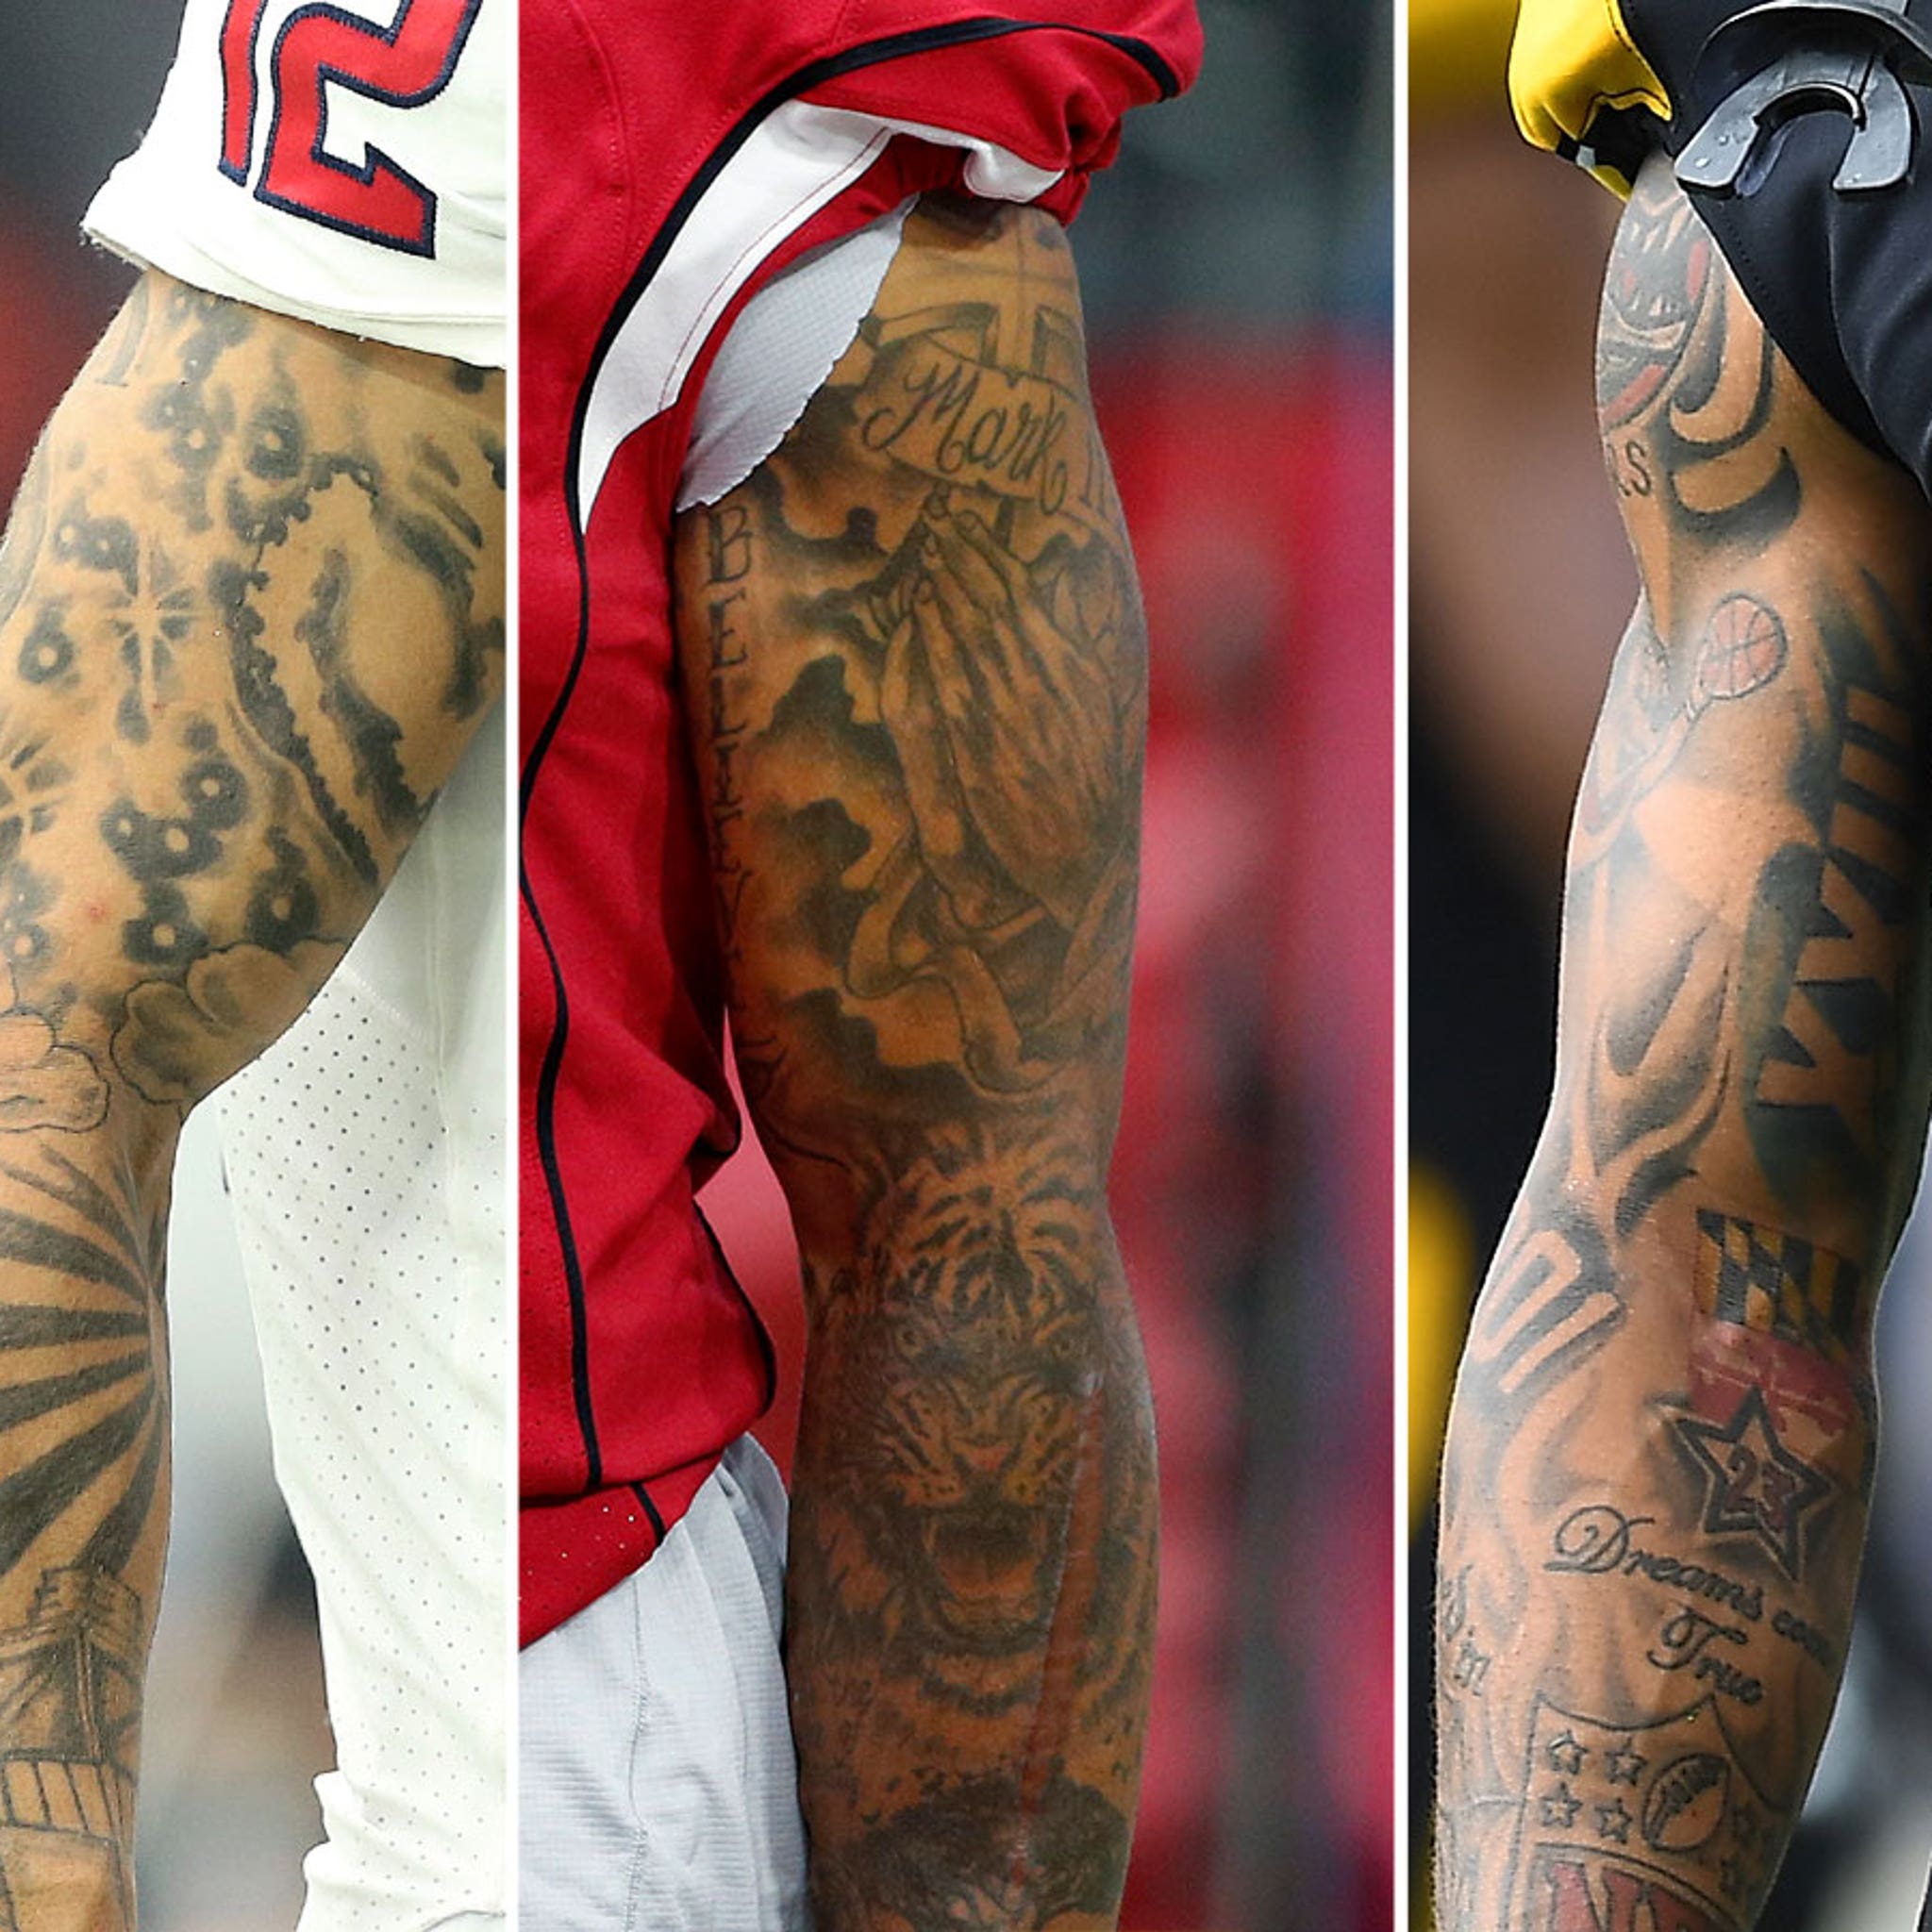 NFL teams will investigate players tattoos